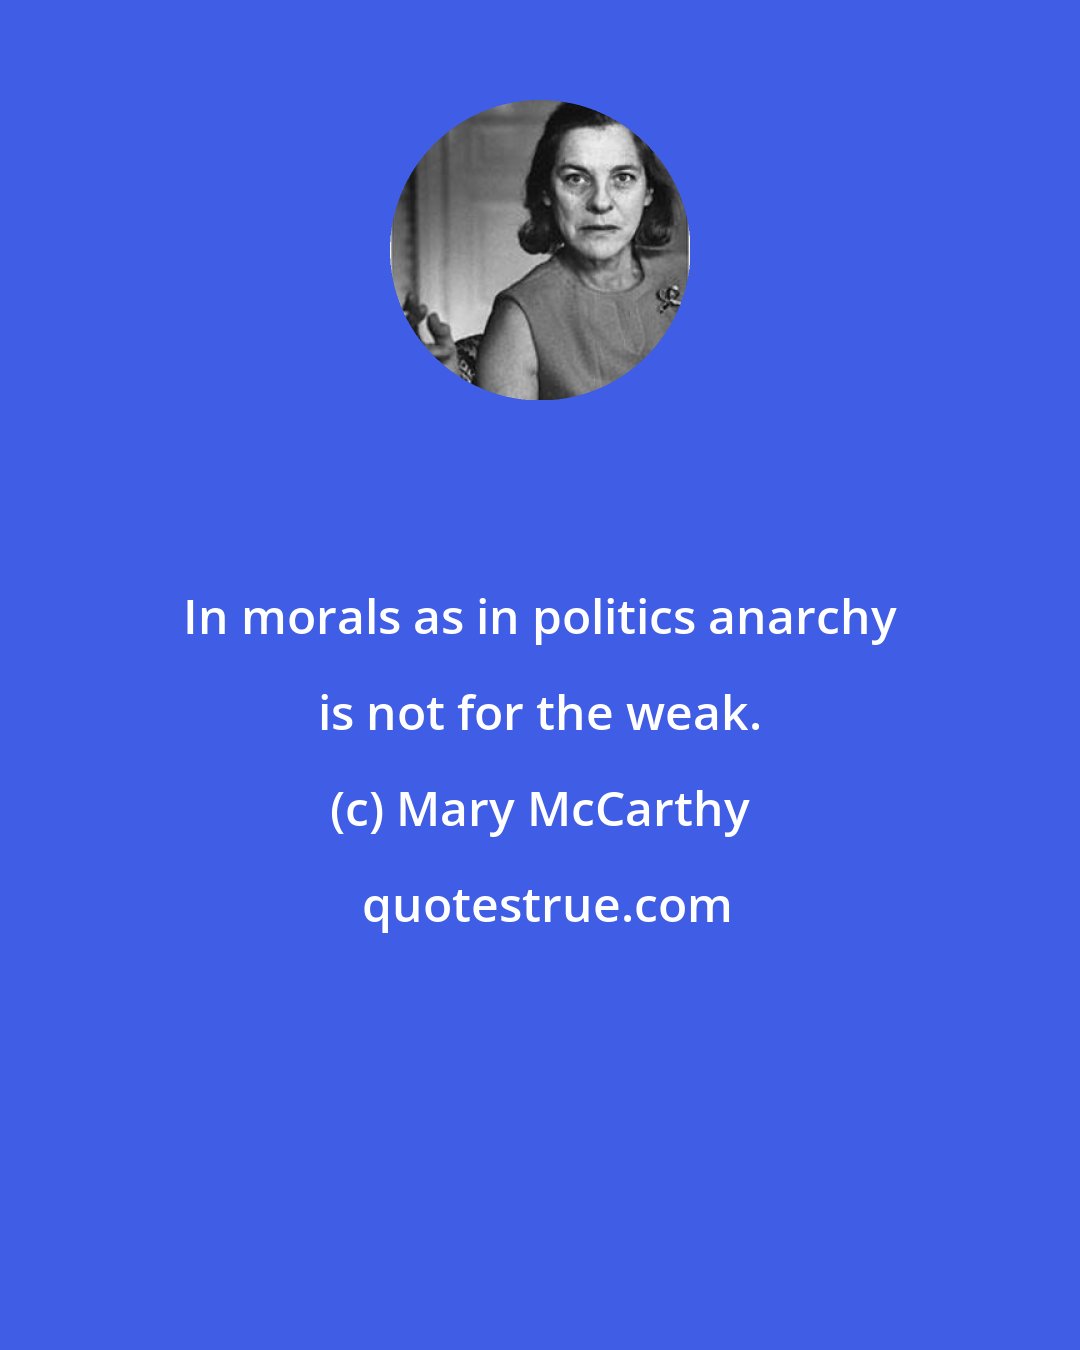 Mary McCarthy: In morals as in politics anarchy is not for the weak.